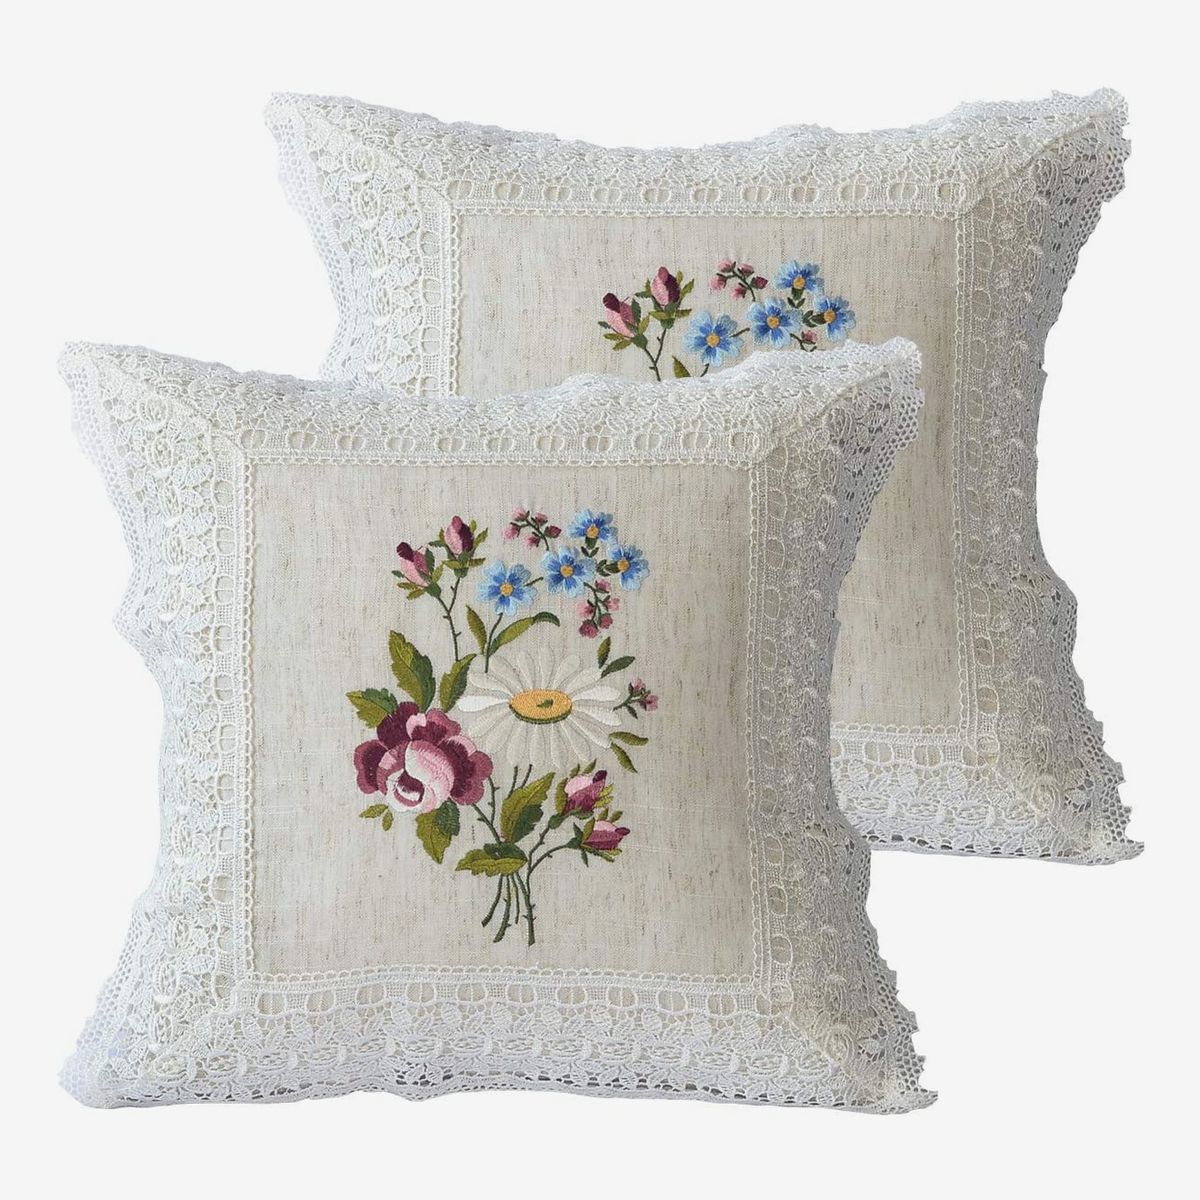 Beautiful Chocolate Cottage Shabby Chic Roses Throw Pillow Cover 18" US Seller